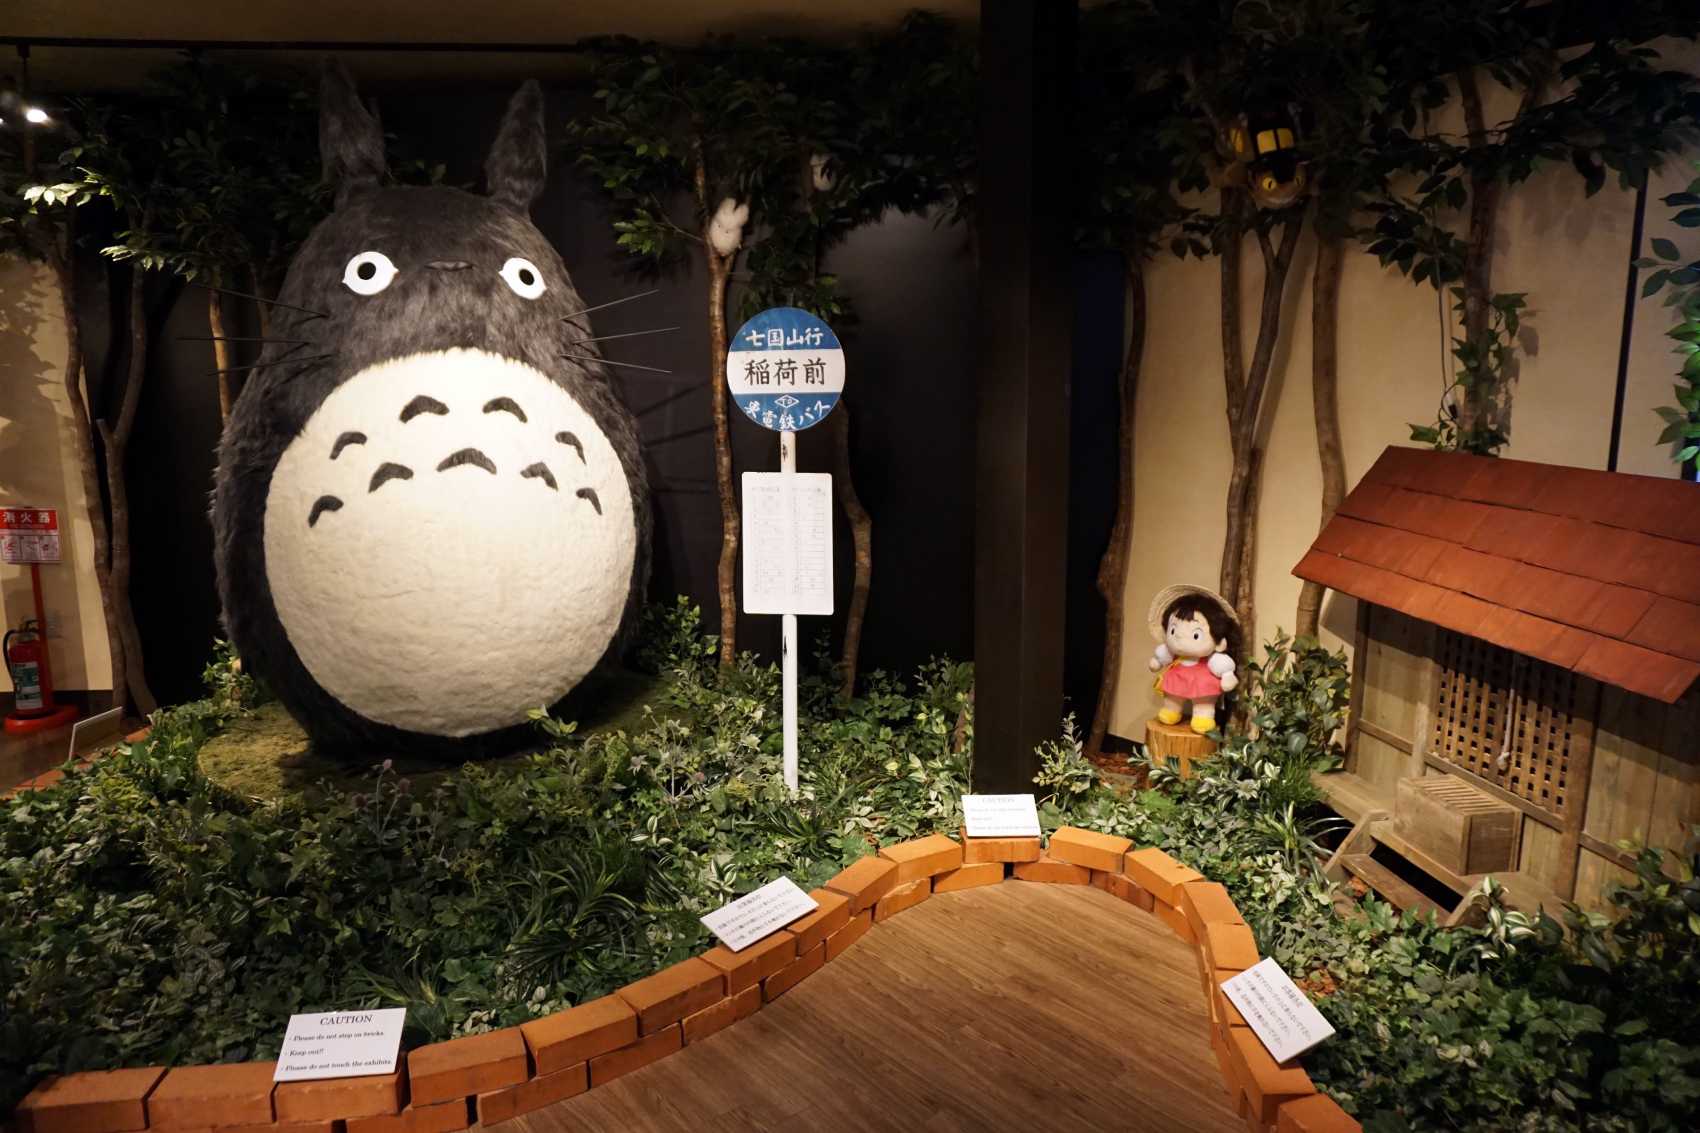 A large model of Totoro stands alongside a bus stop. To its right is a small Mei and a house model